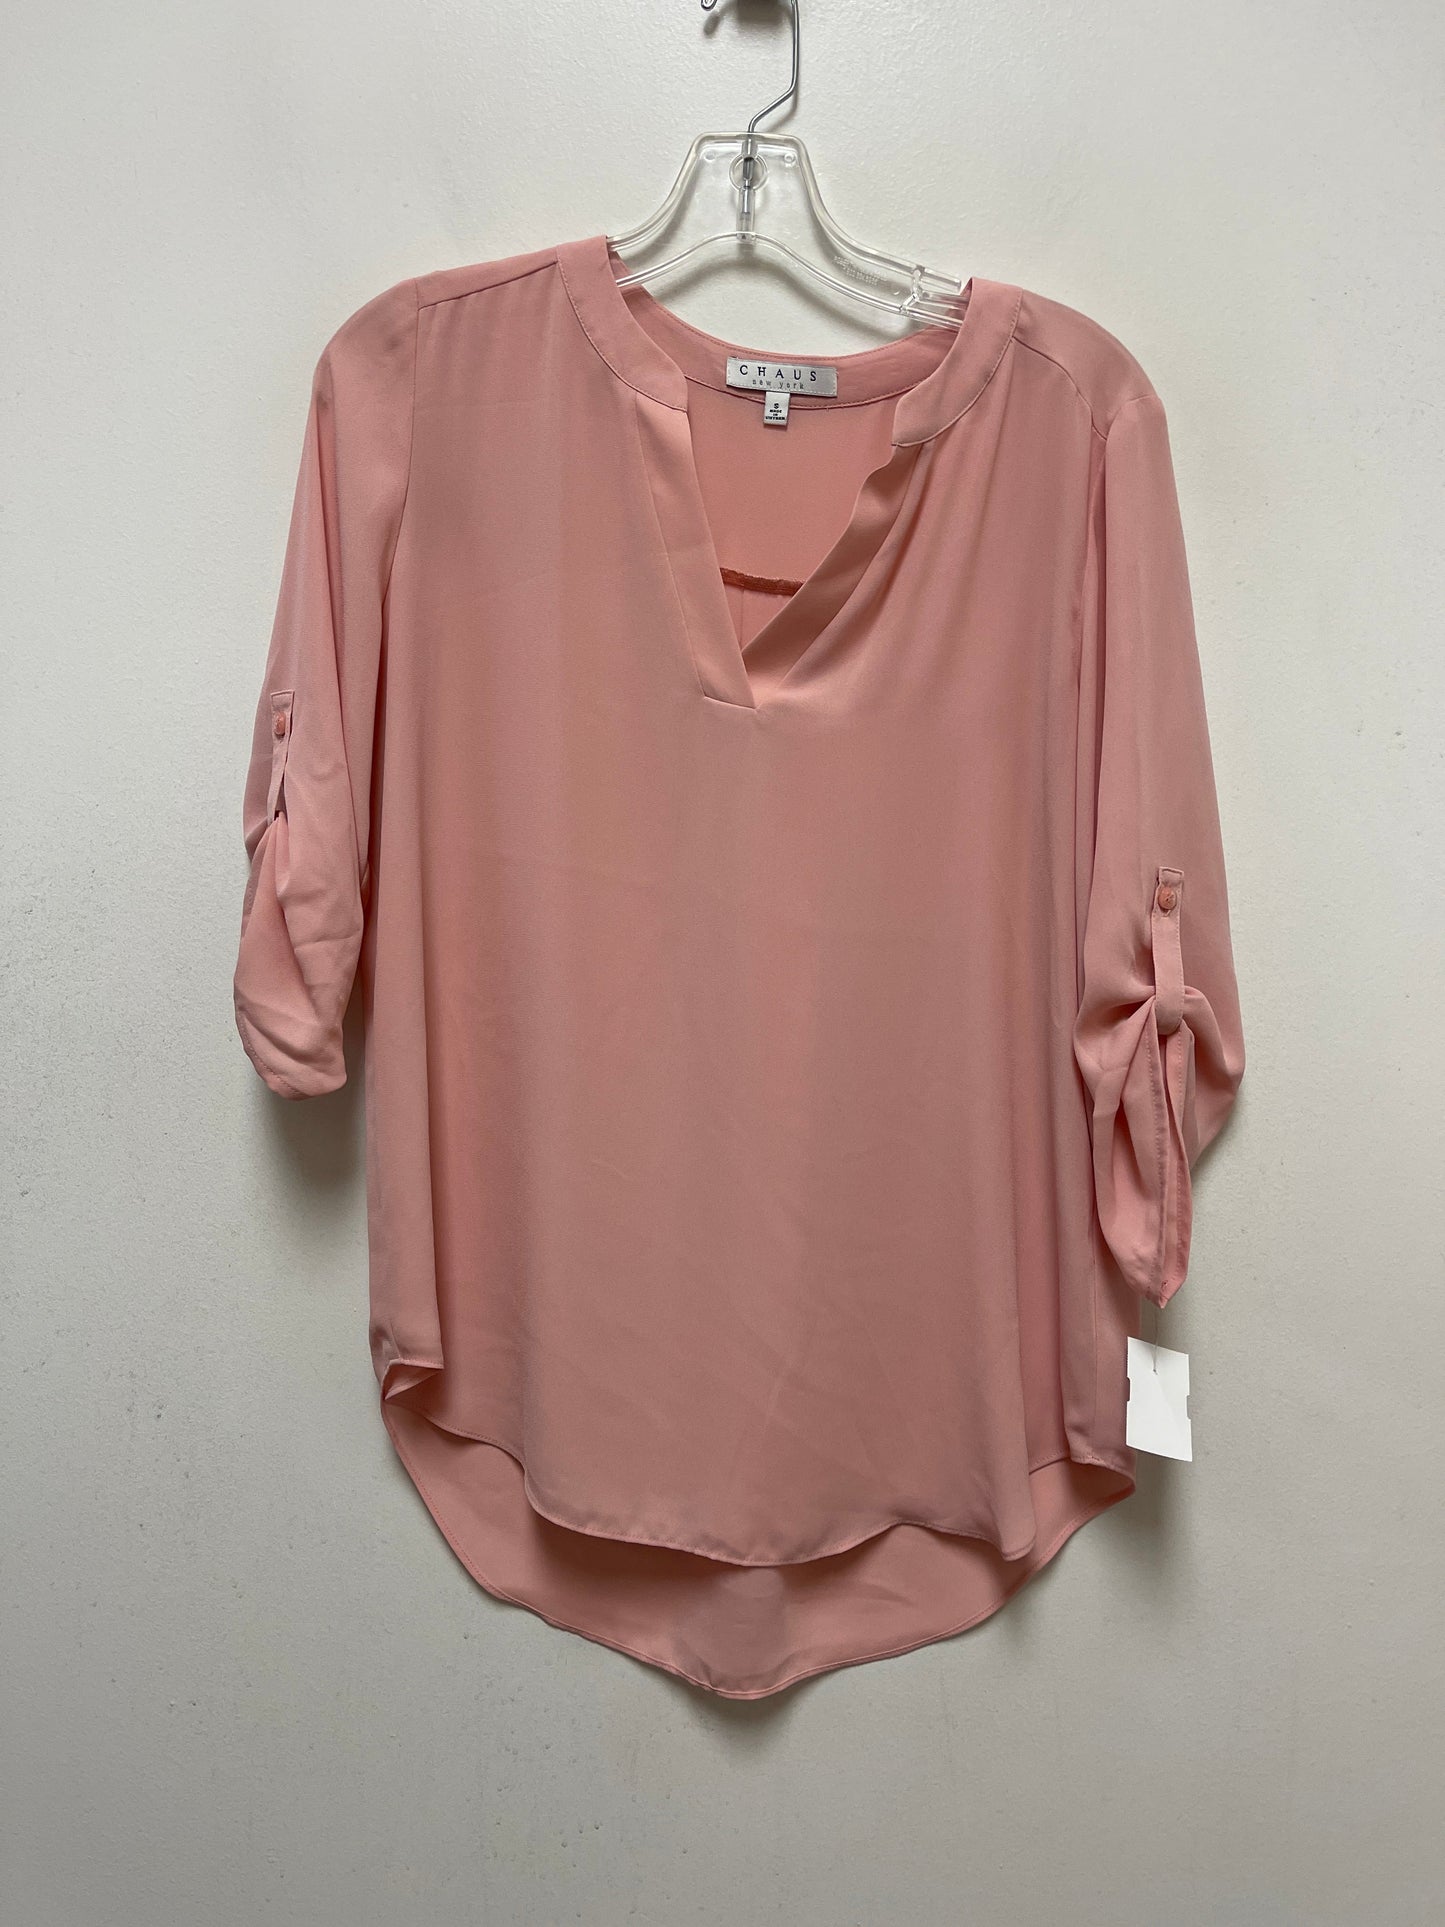 Pink Top 3/4 Sleeve Chaus, Size S